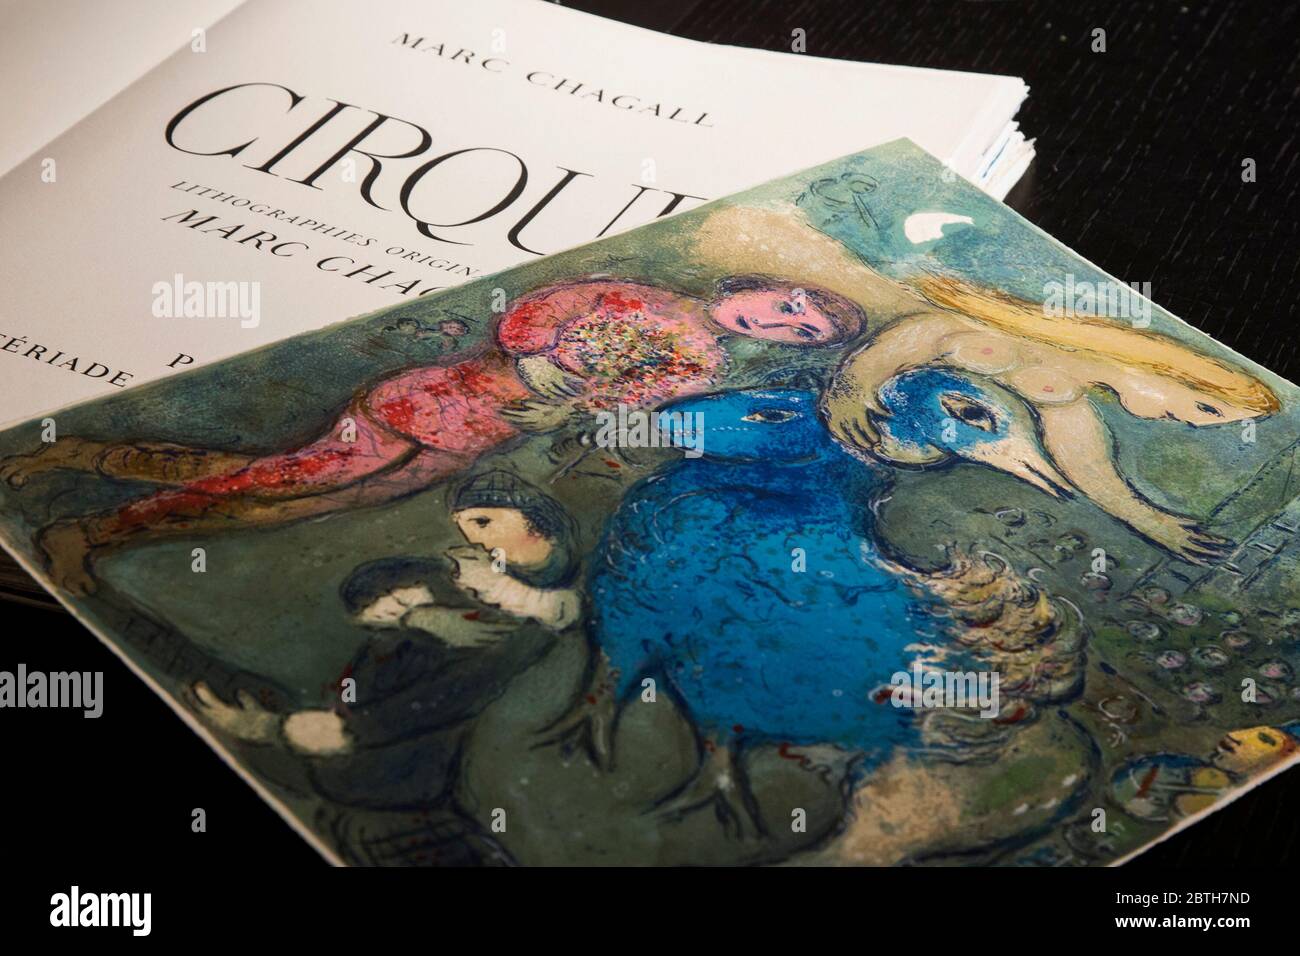 London, UK. 23 June 2017. Marc Chagall's Cirque (Circus) leads Bonhams Prints and Multiples Sale on 27 June 2017. Cirque was printed in an edition of 250 in 1967 and is made up of 38 lithographs. Estimate GBP 120,000-180,000. Stock Photo